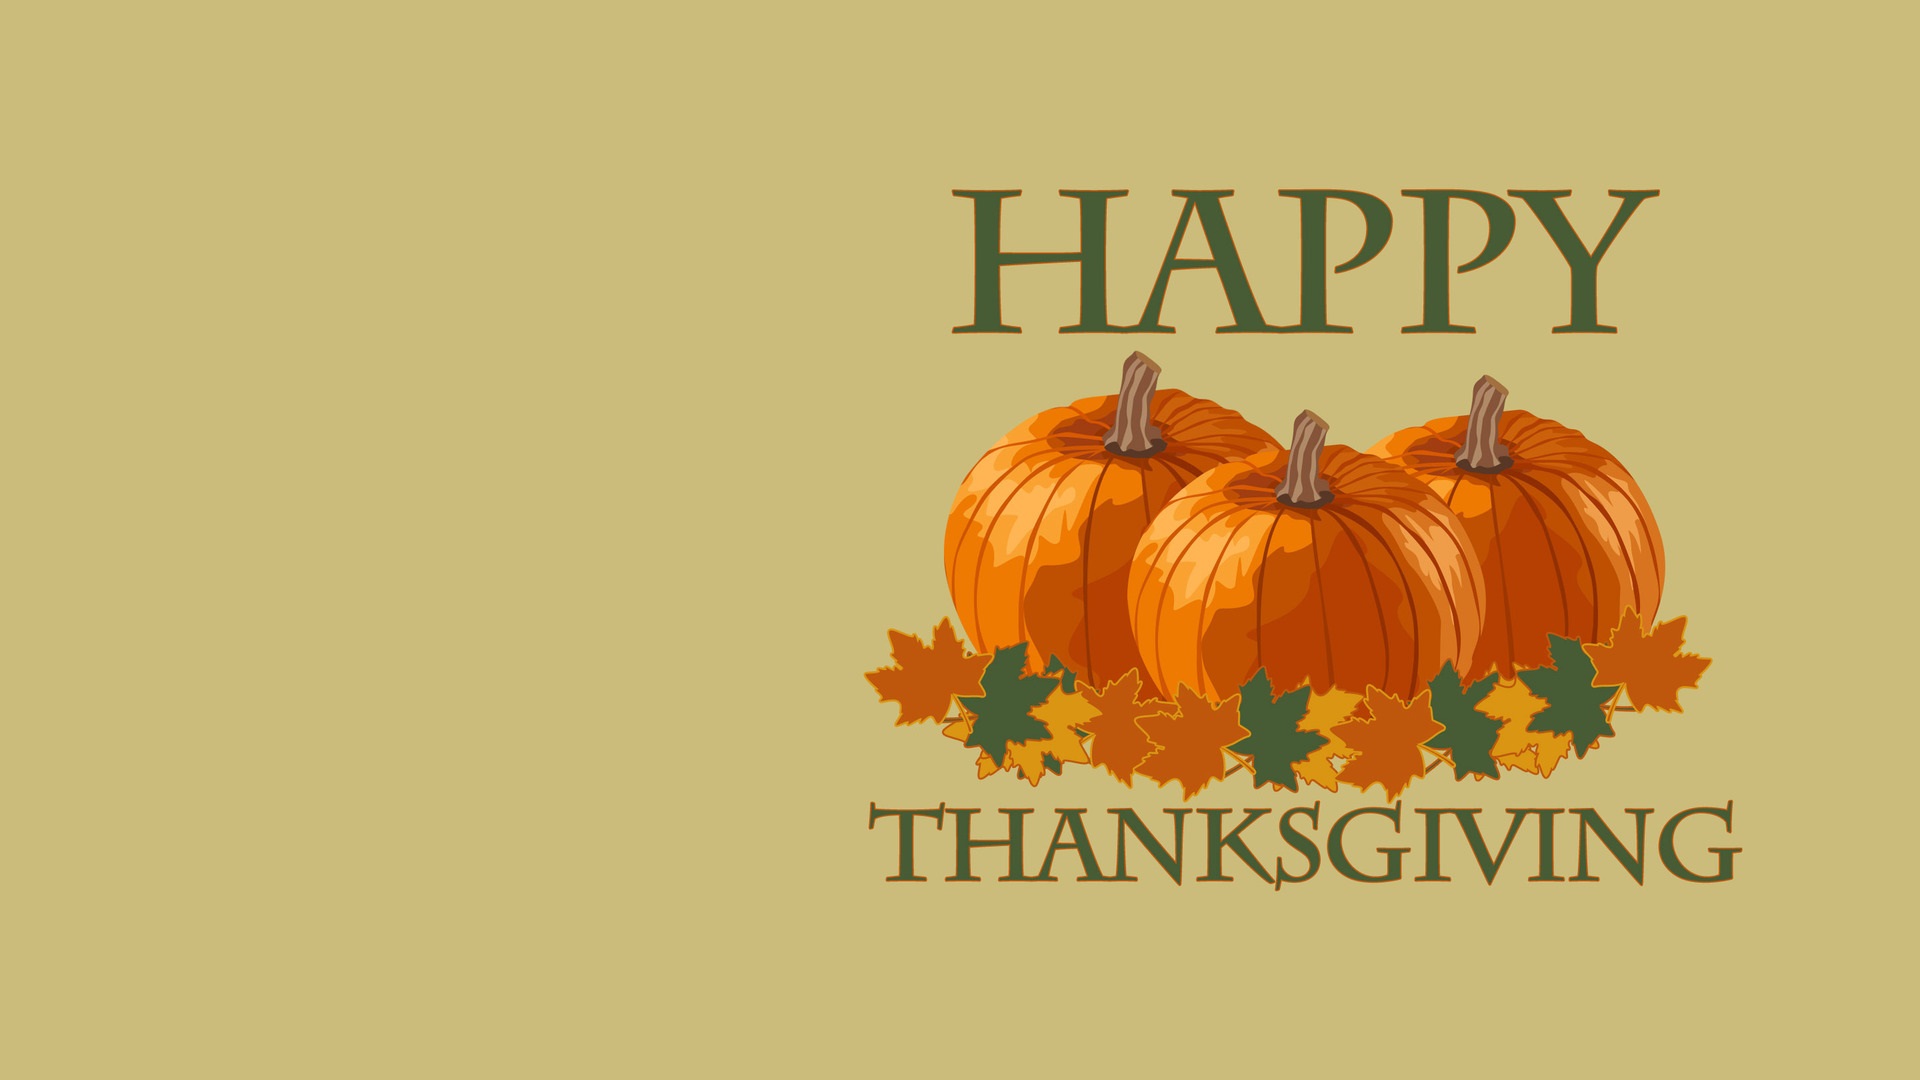 Thanksgiving wallpapers 2013 2013 Thanksgiving day greetings 2013